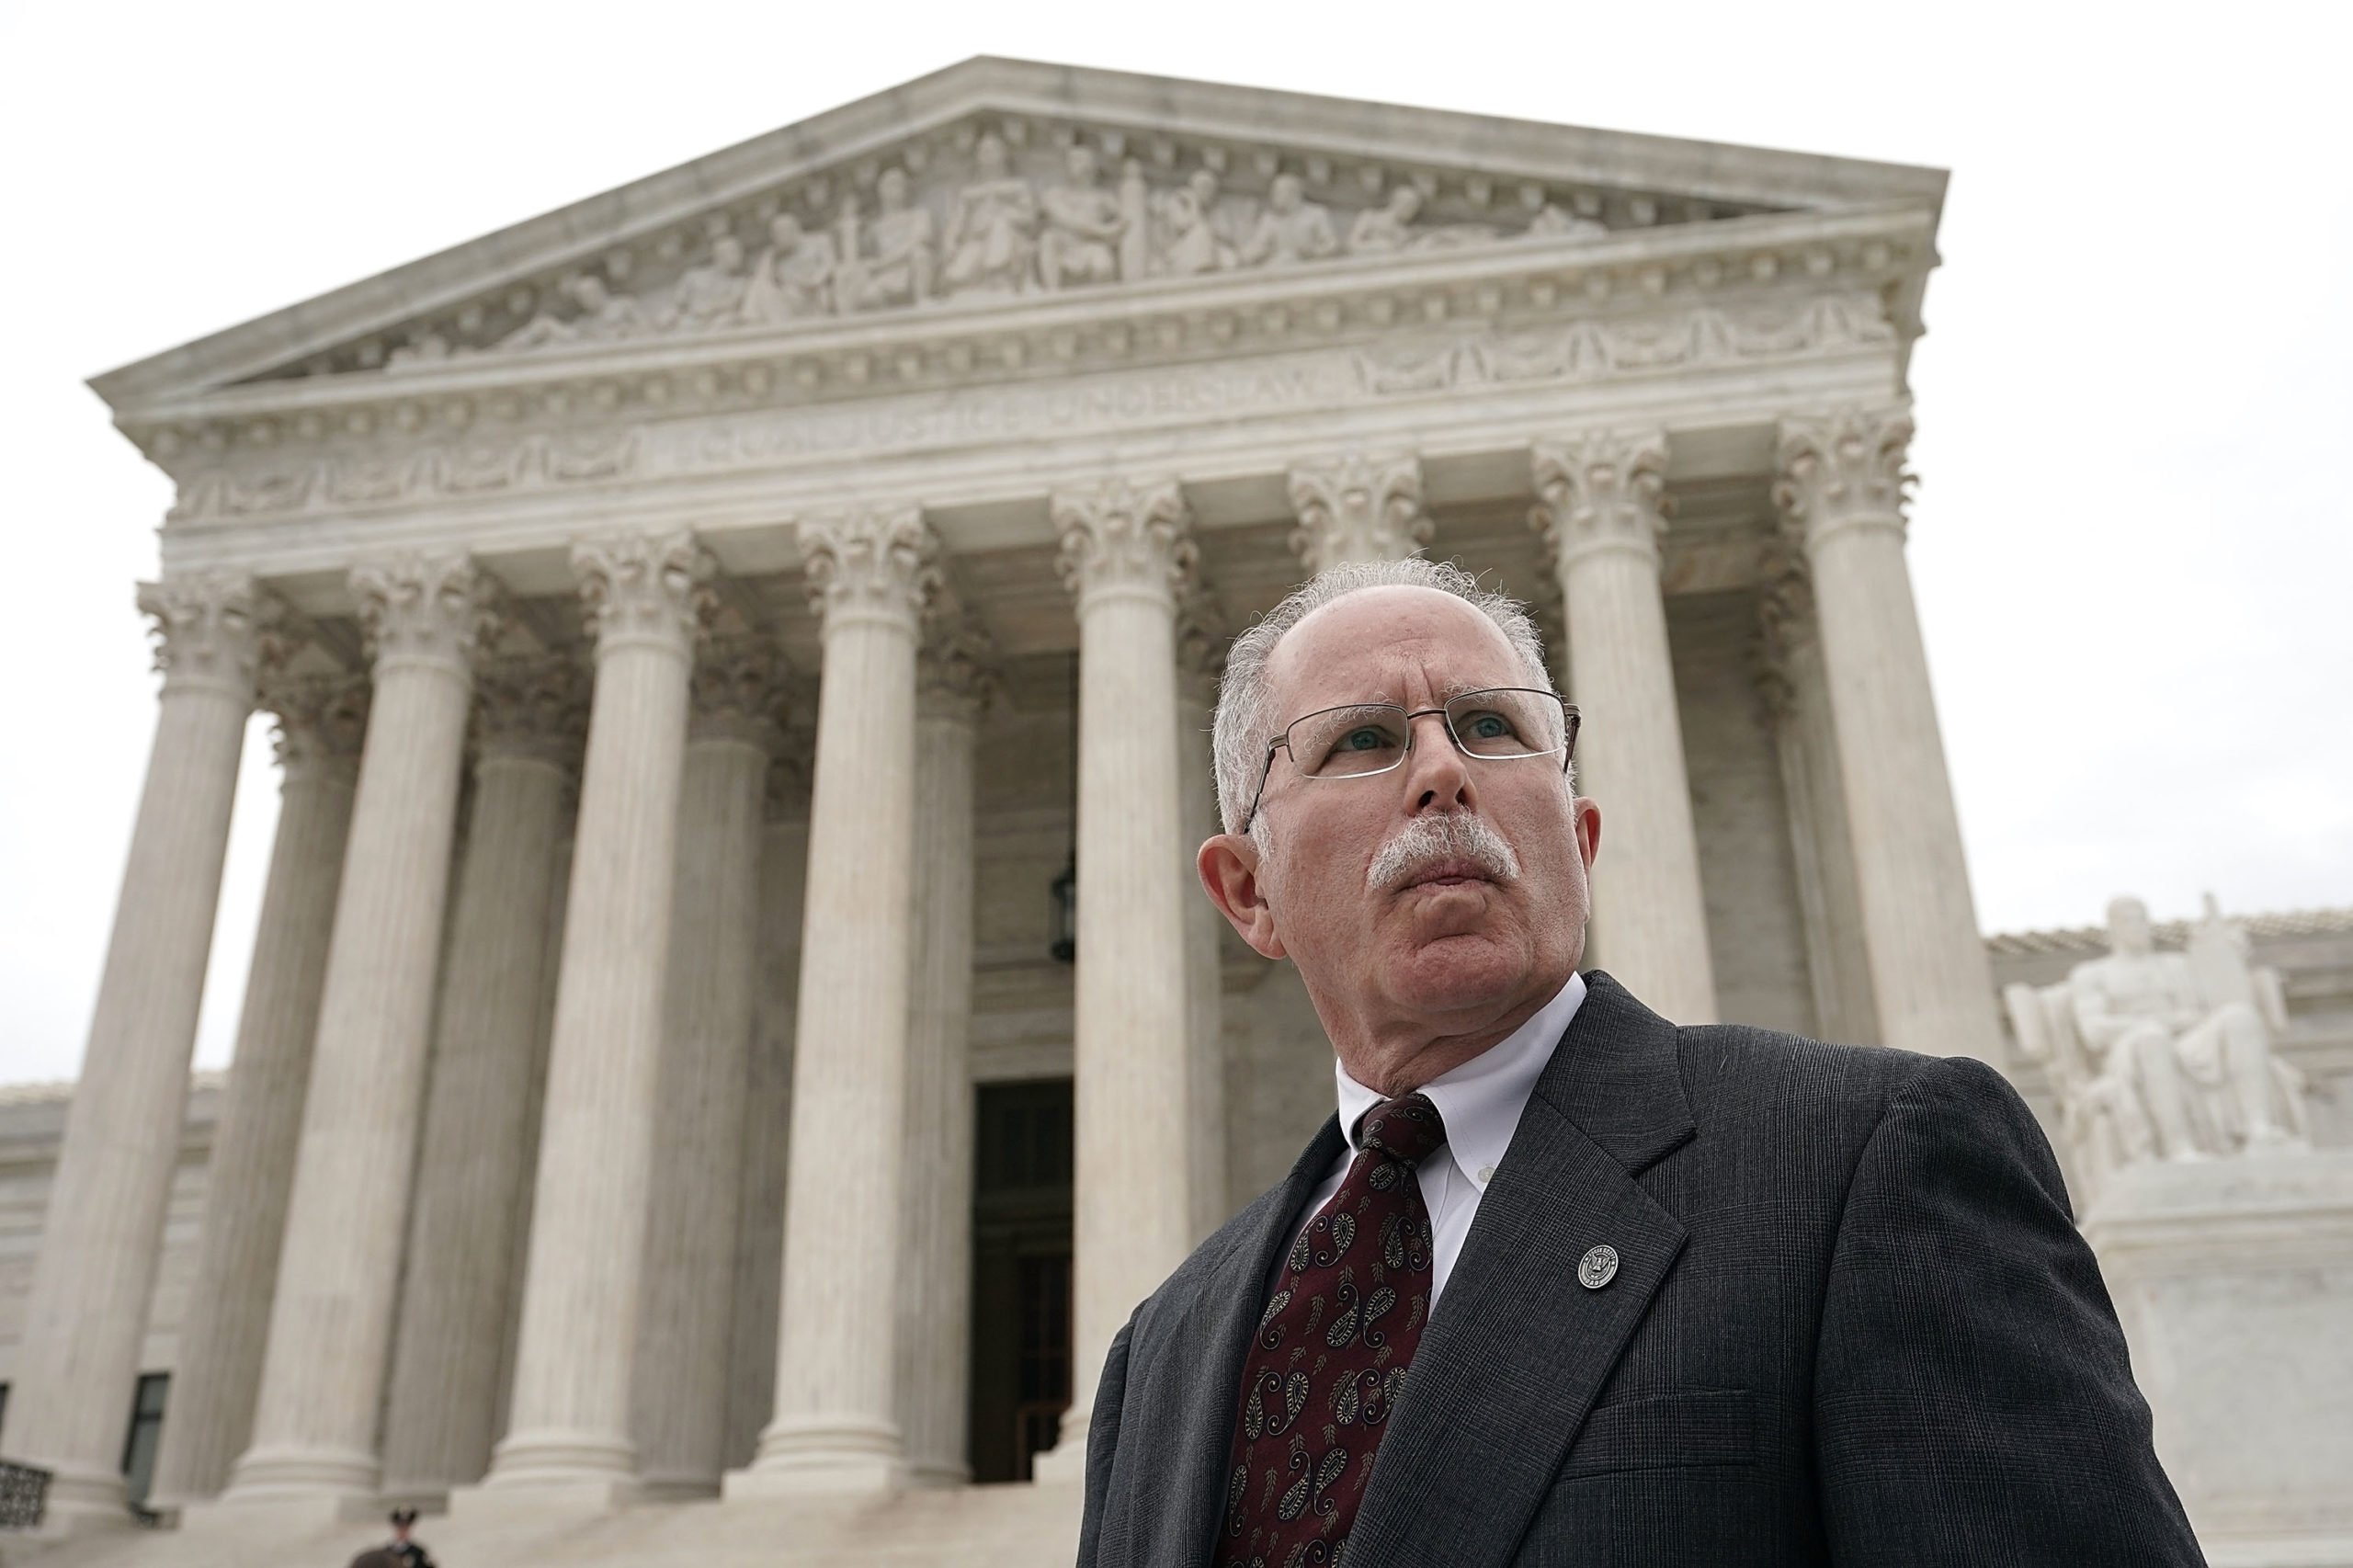 Lead plaintiff in Janus v. AFSCME, Mark Janus passes in front of the Supreme Court after a hearing on Feb. 26, 2018 in Washington, D.C. (Alex Wong/Getty Images)